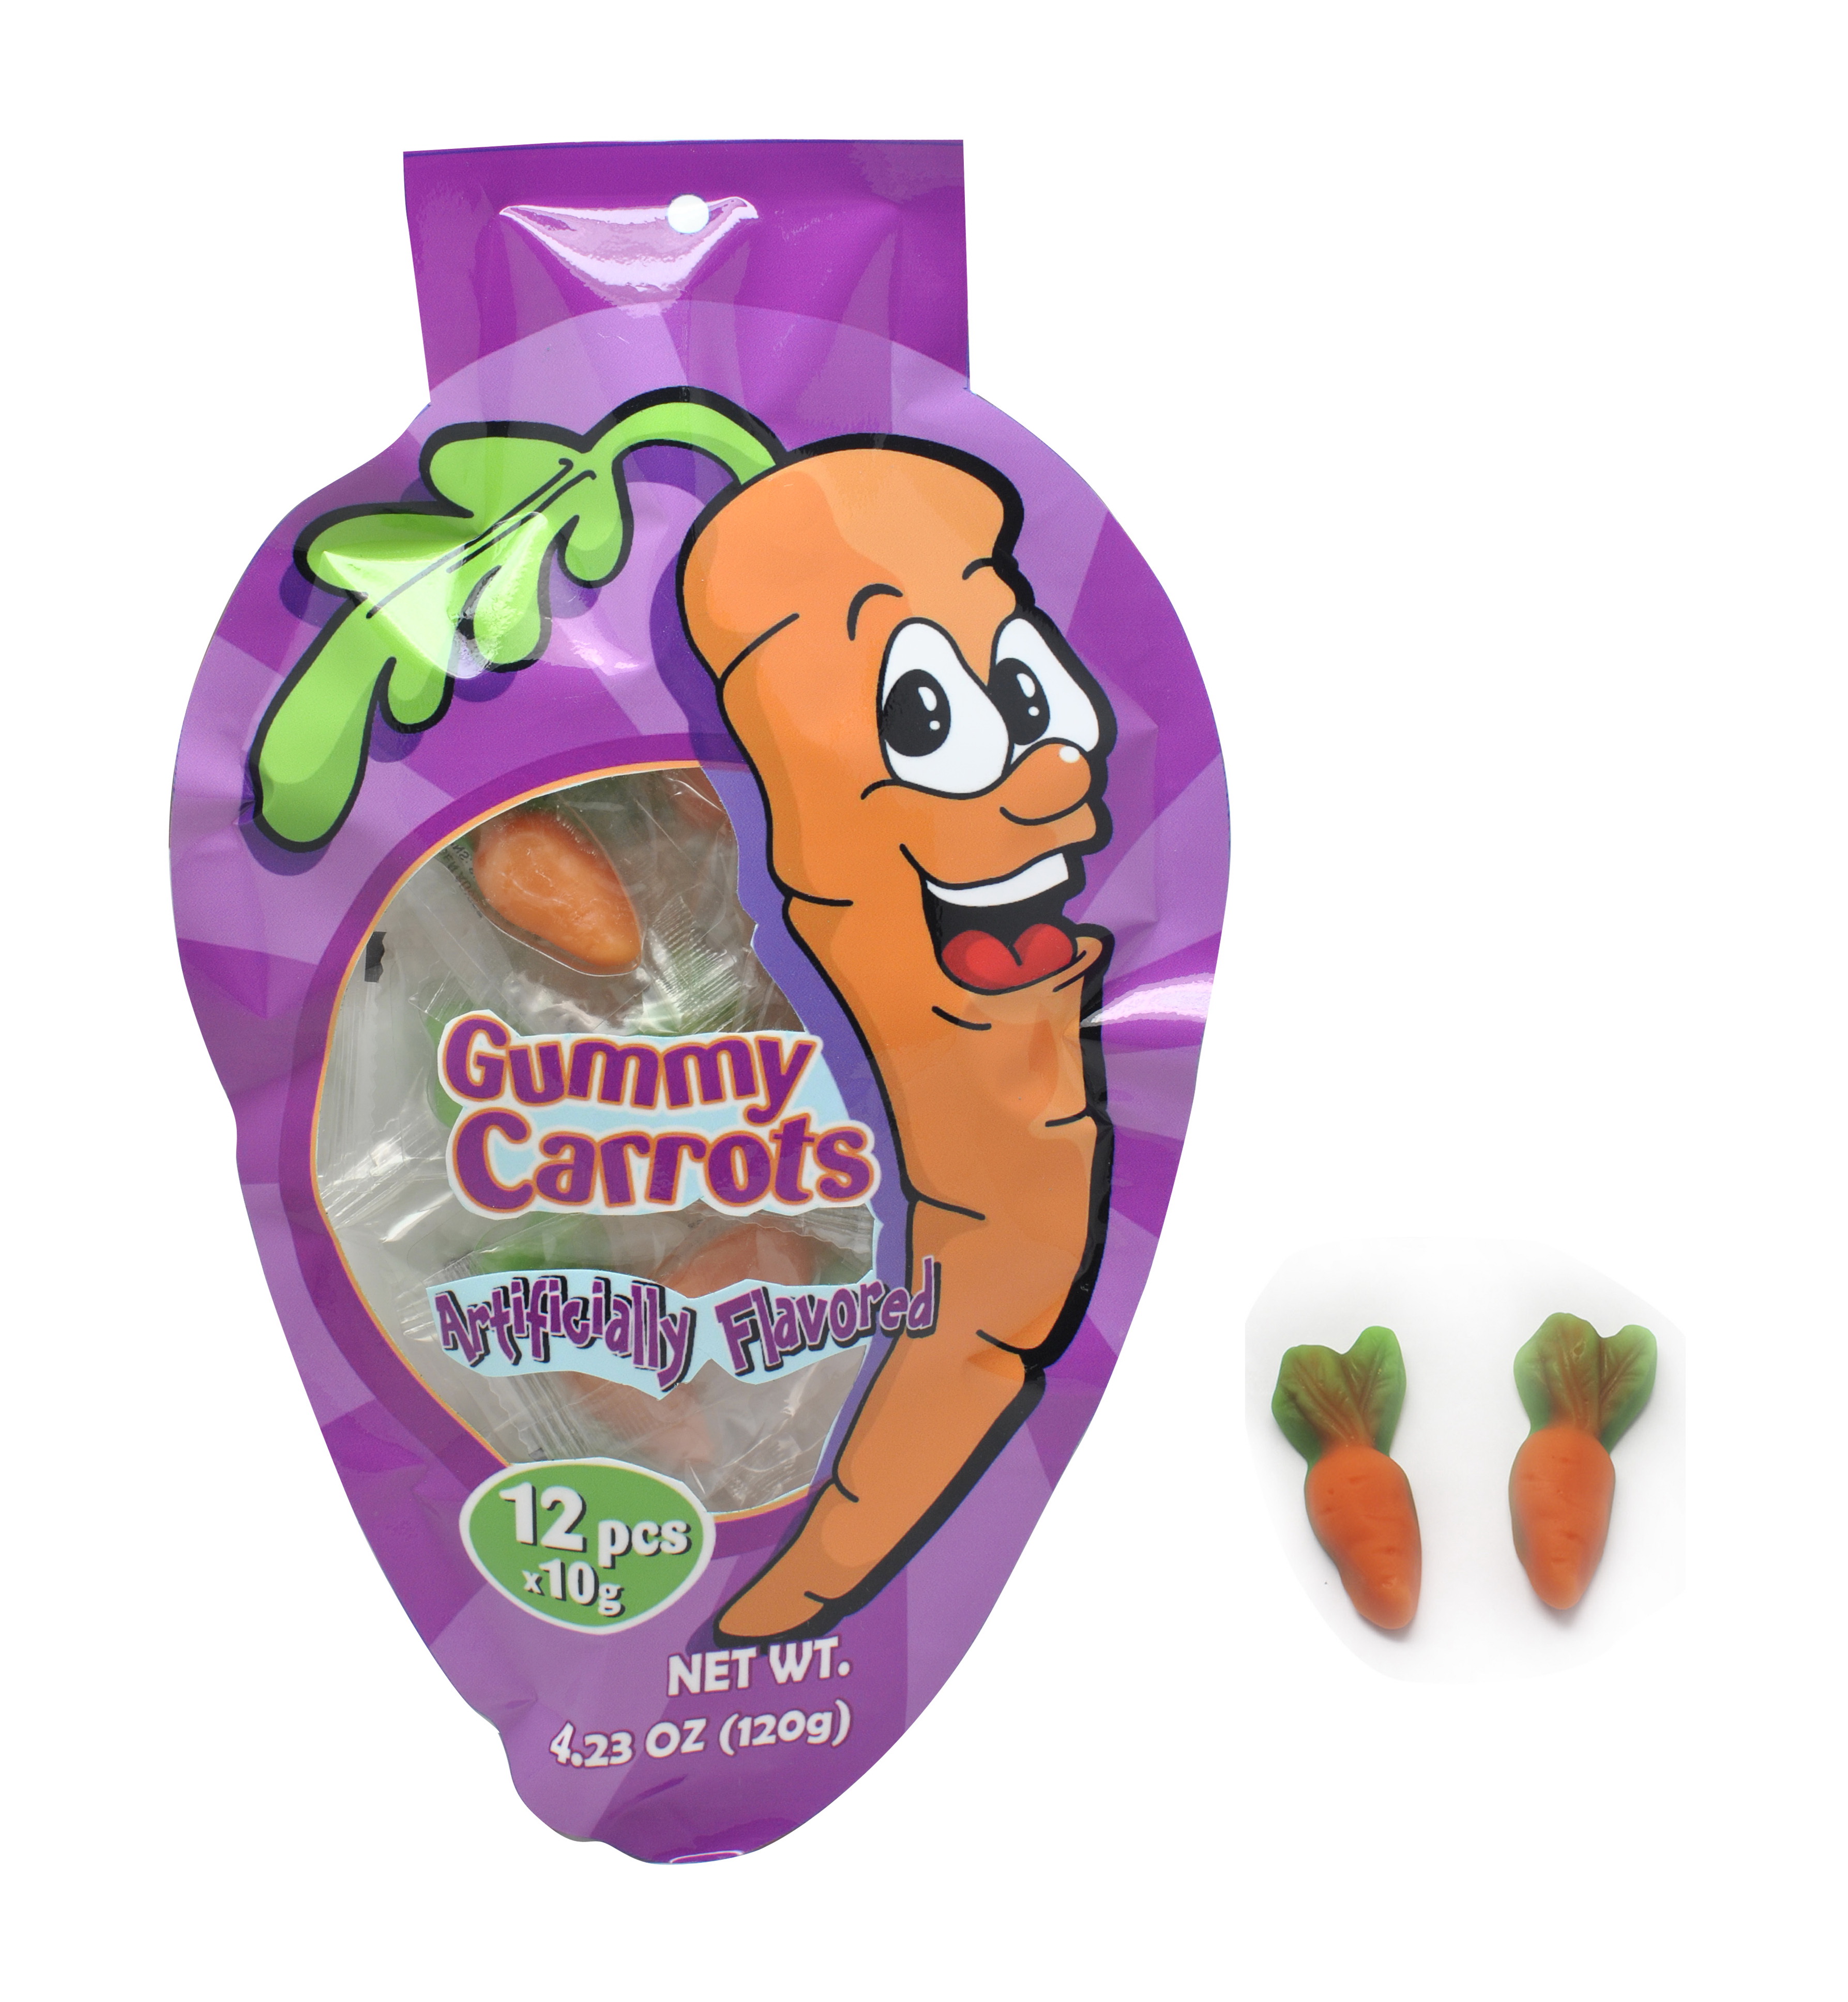 Gummy Carrot in cute shape bag by Shenzhen Amos Sweets & Foods Co., Ltd.